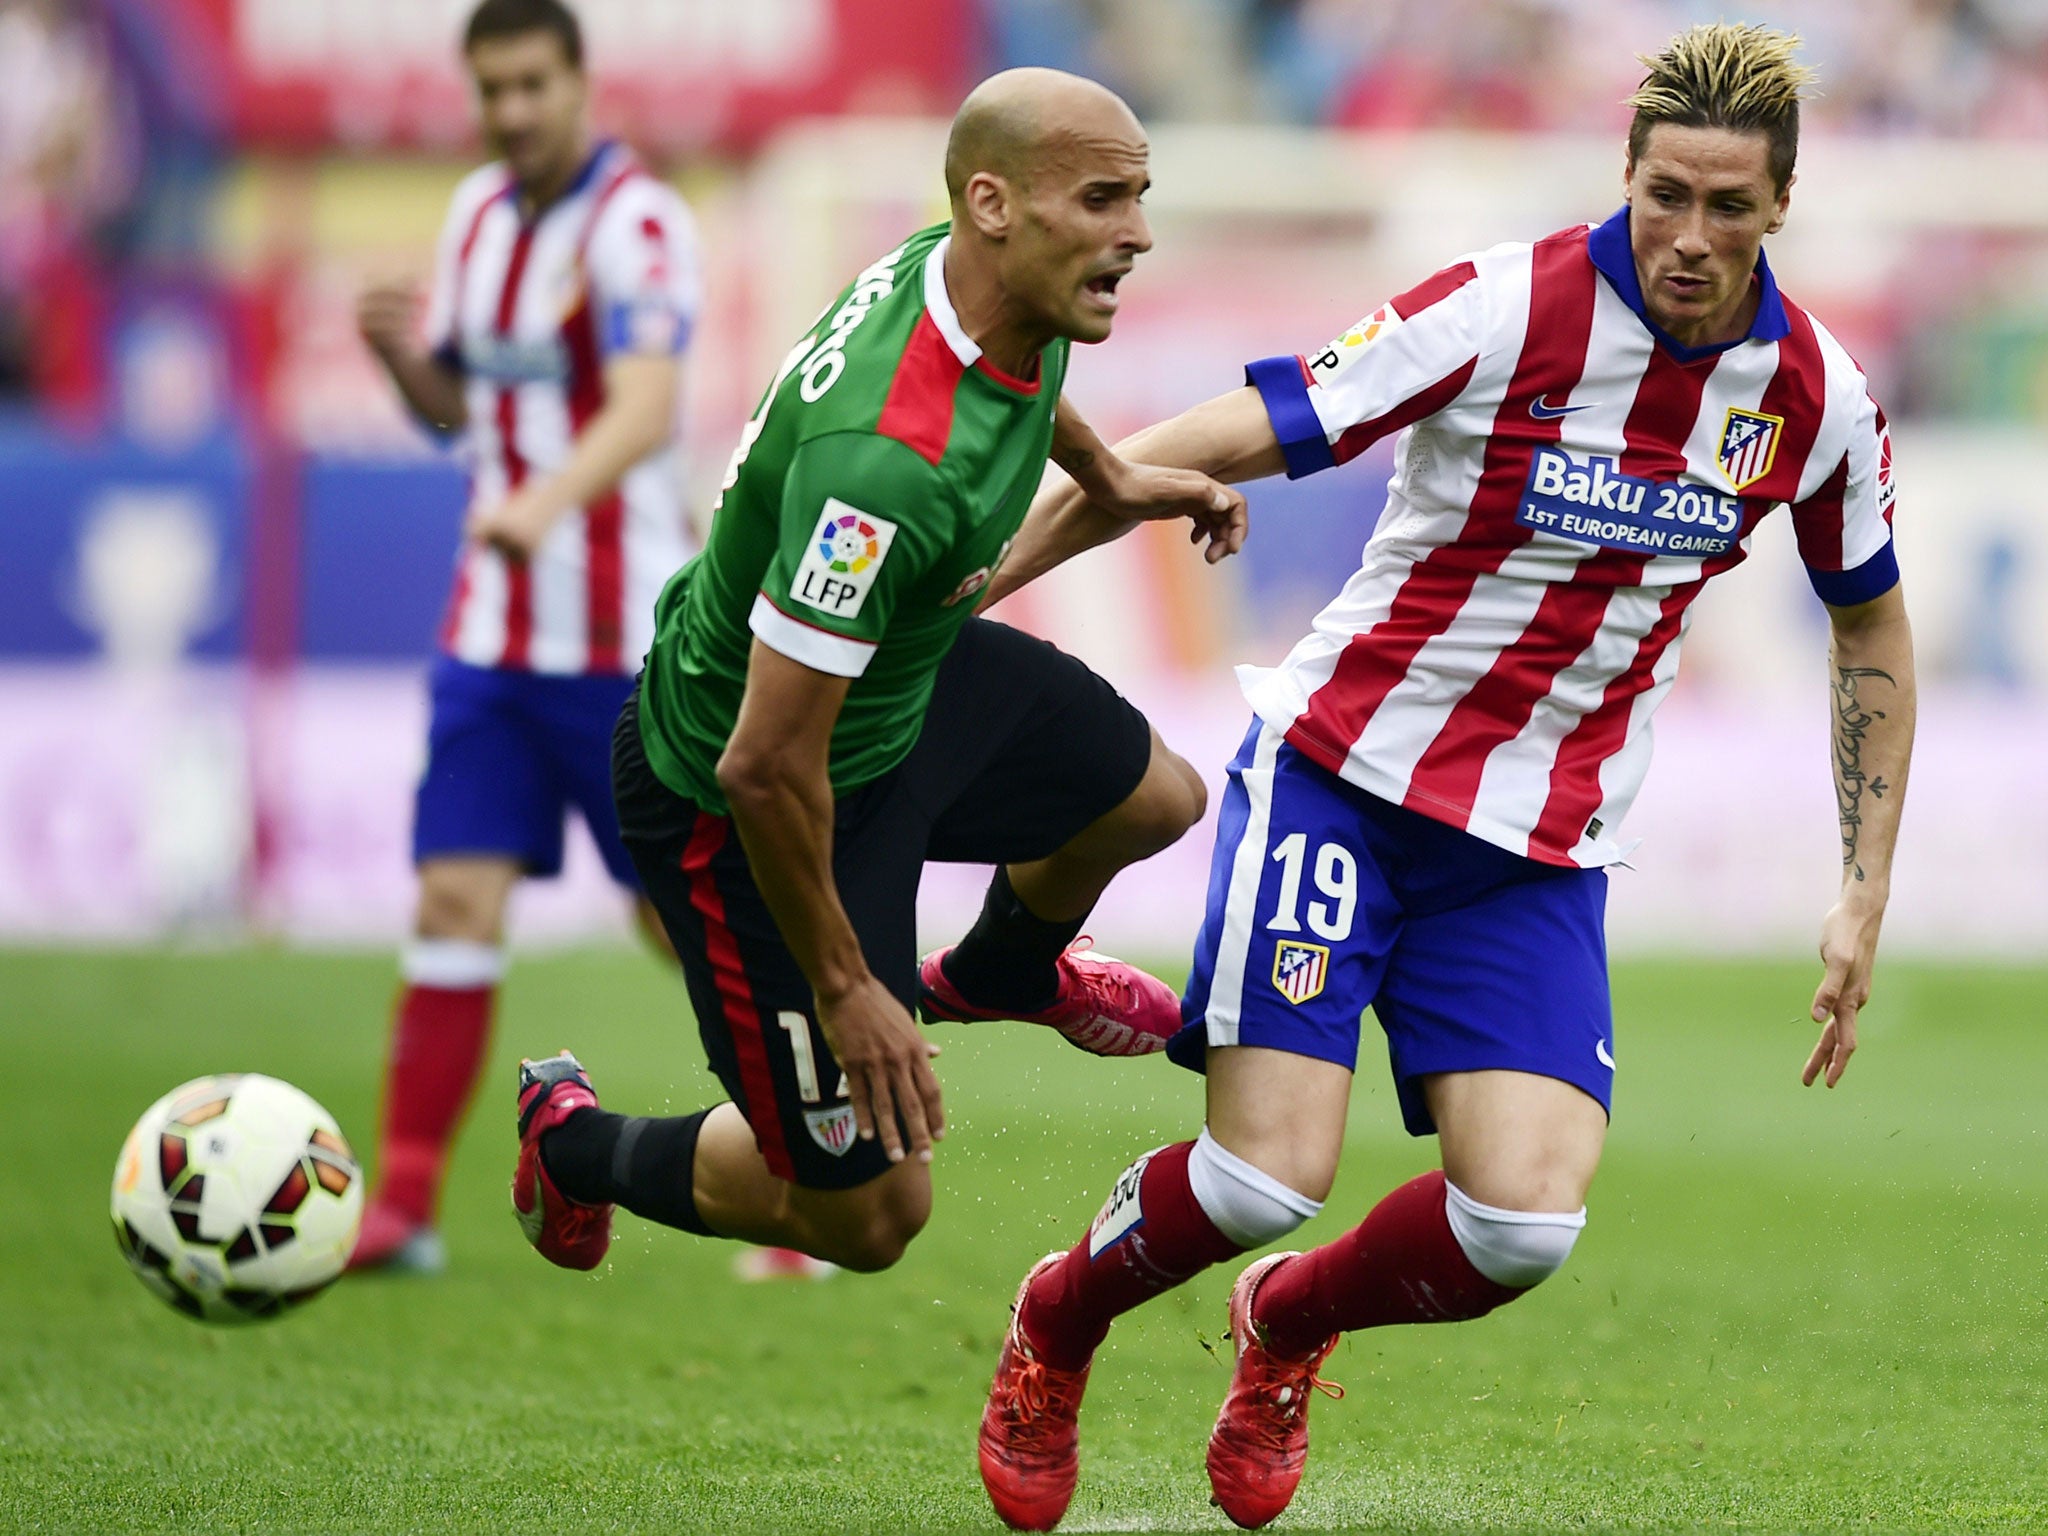 Atletico Madrid's forward Fernando Torres (R) vies with Athletic Bilbao's midfielder Mikel Rico during the Spanish league football match Club Atletico de Madrid vs Athletic Club Bilbao at the Vicente Calderon stadium in Madrid on May 2, 2015.